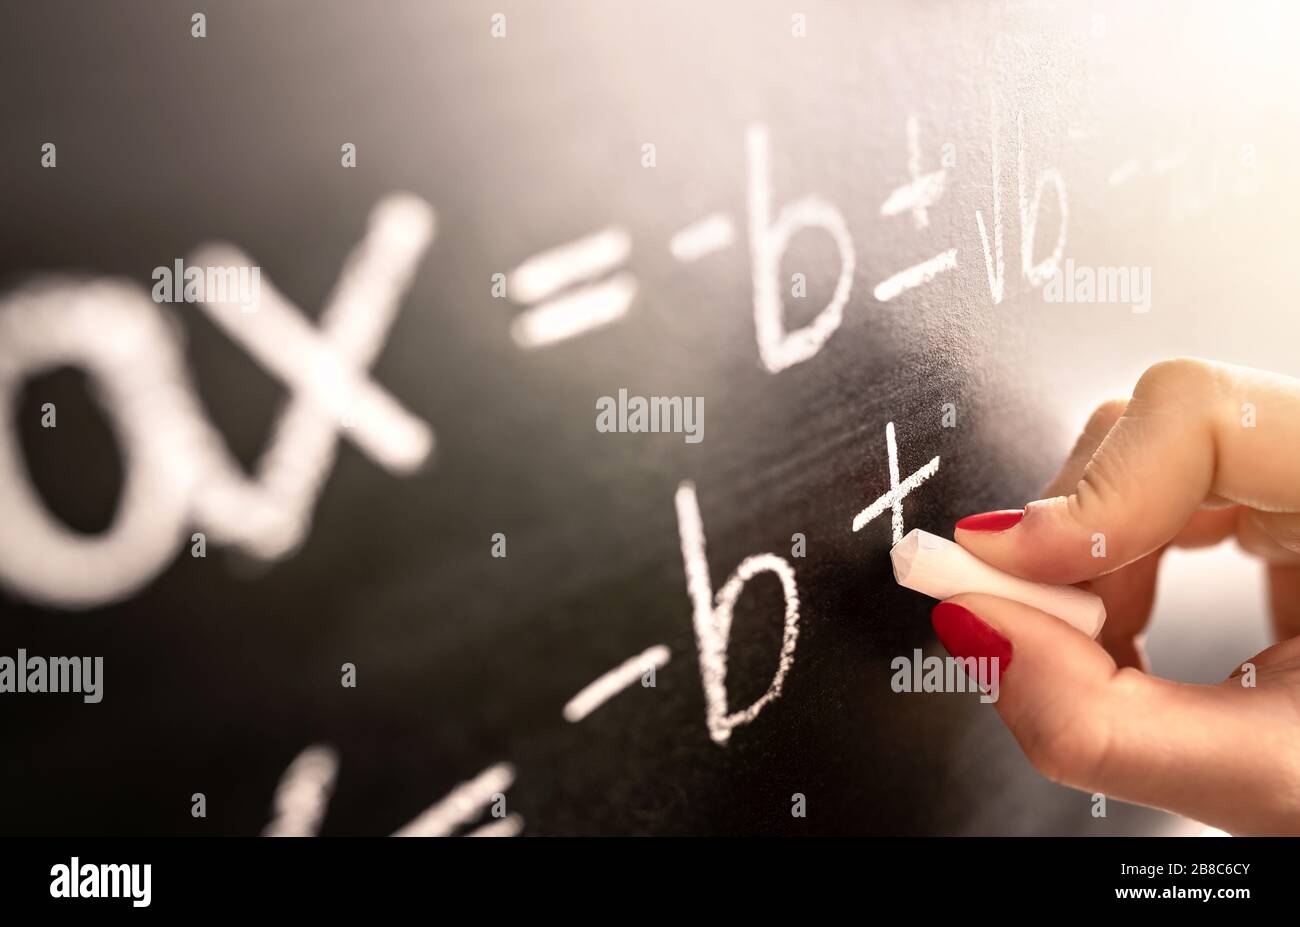 Math teacher writing function, equation or calculation on blackboard in school classroom. Student calculating on chalkboard. Stock Photo